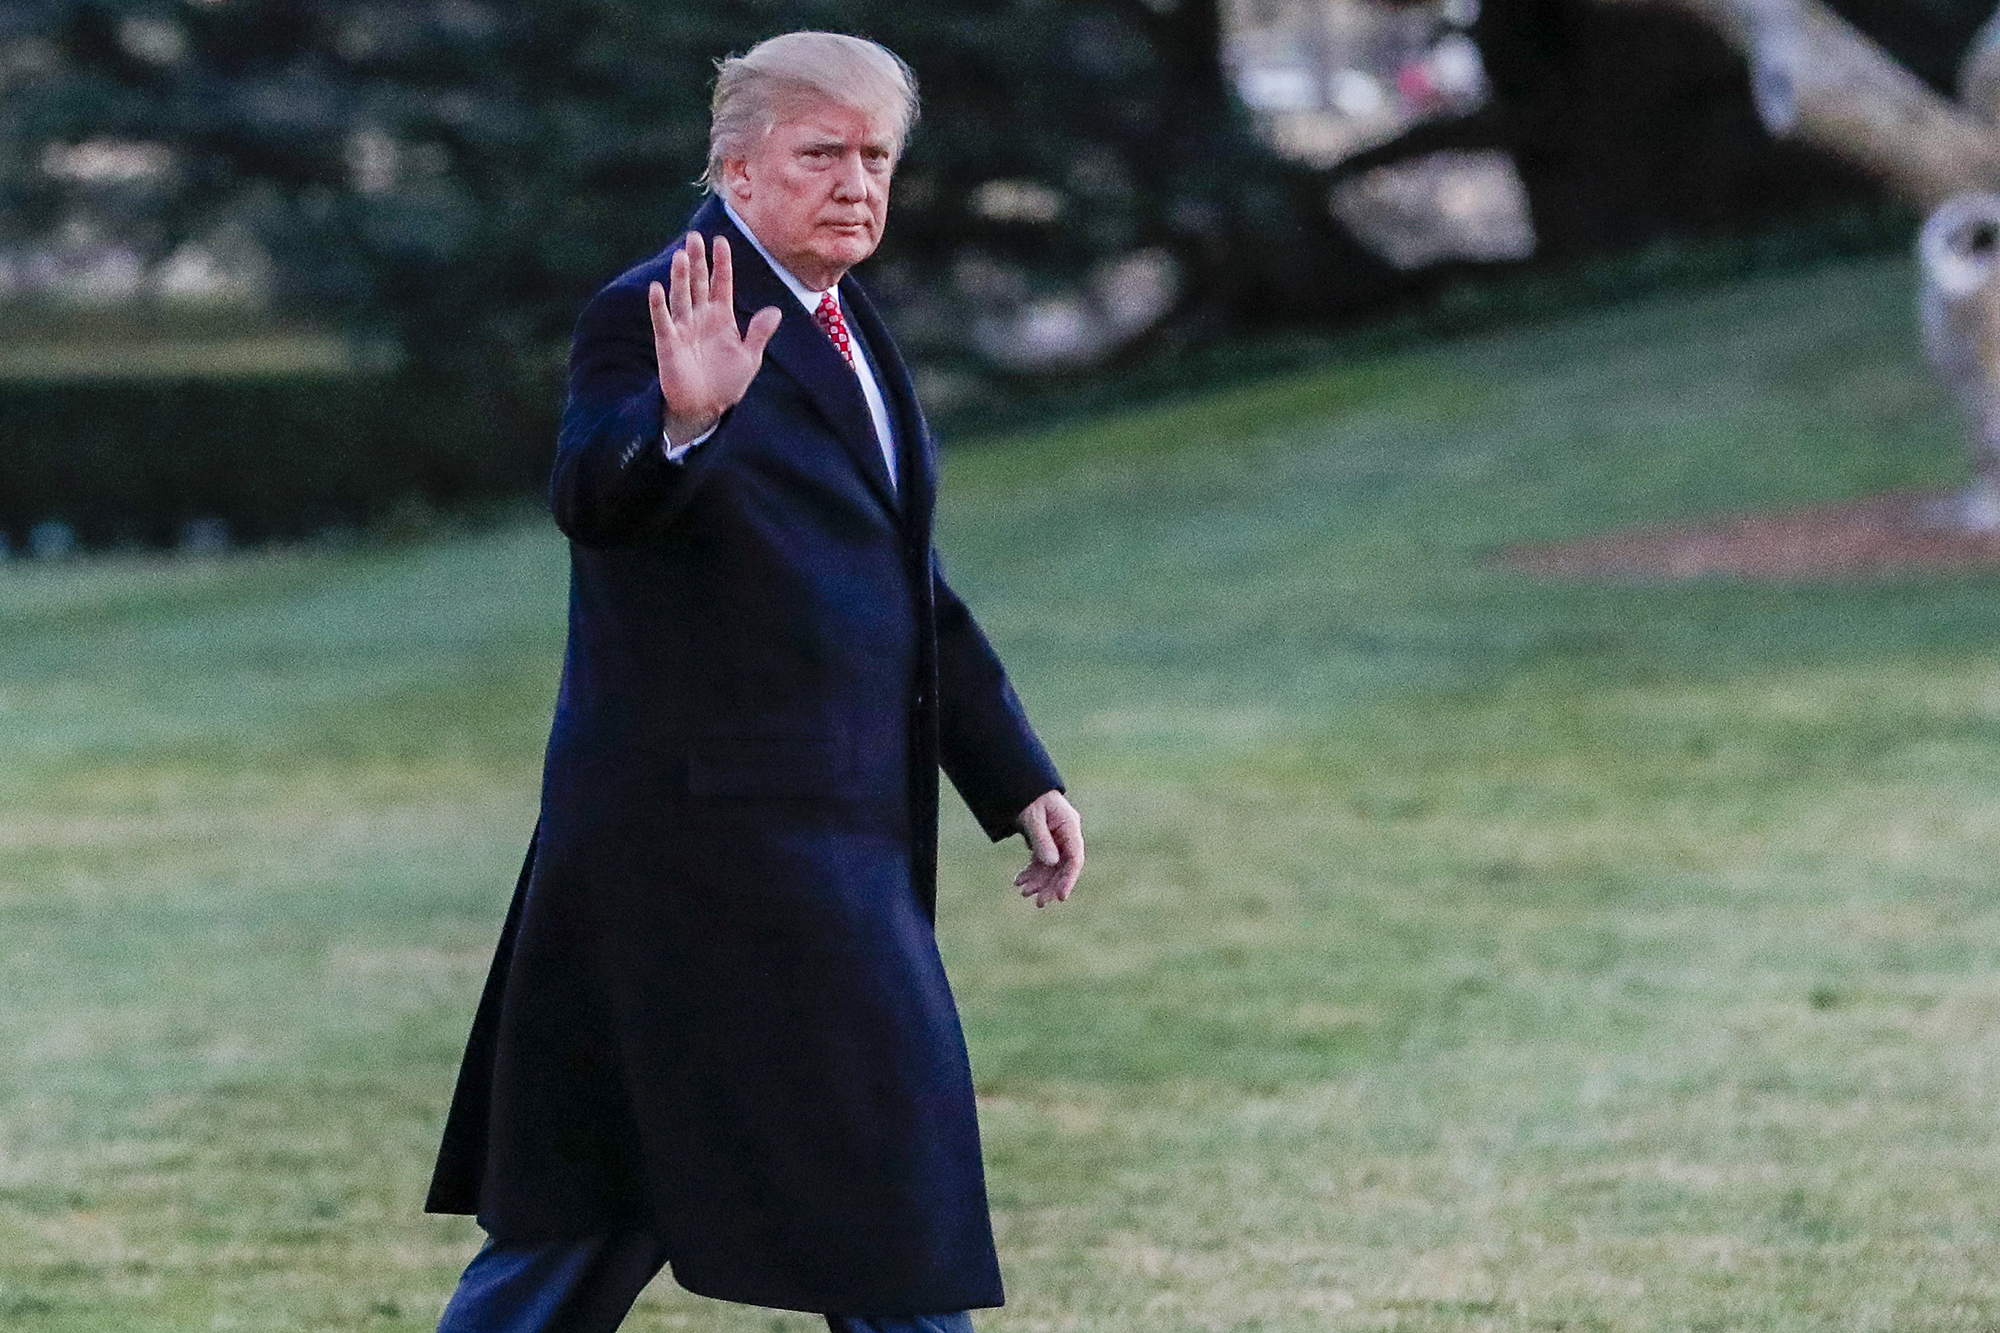 Donald Trump gestures after disembarking Marine One walking on the South Lawn towards the Oval Office of the White House in Washington, D.C., on March 5, 2017.